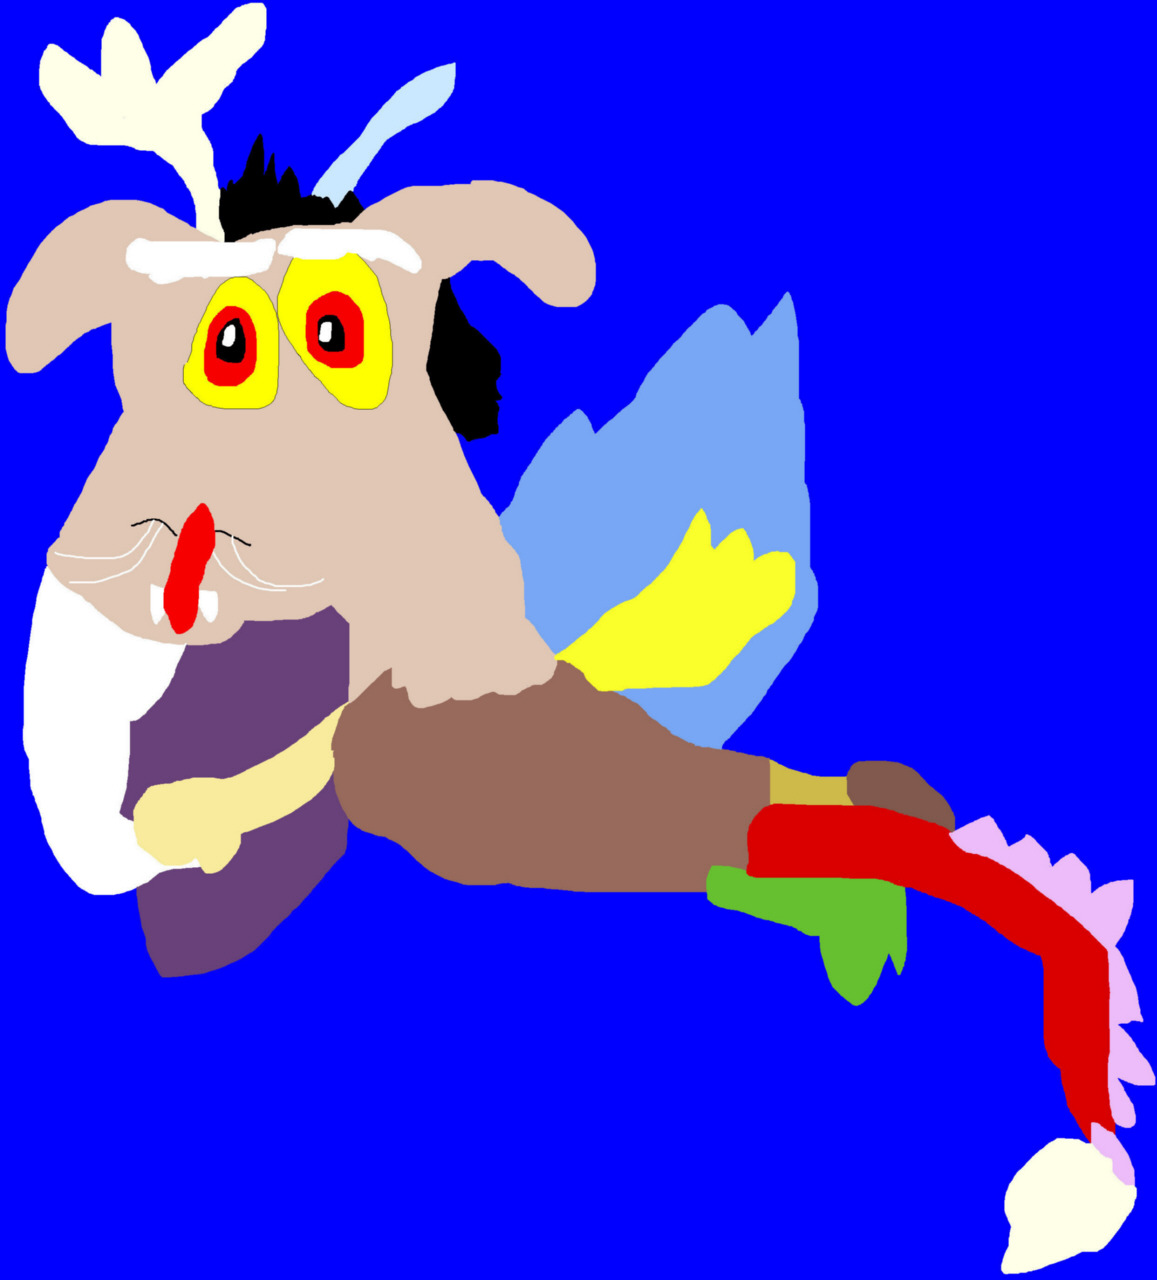 Another Big Durpy Chibi Discord MS Paint^^ by Falconlobo